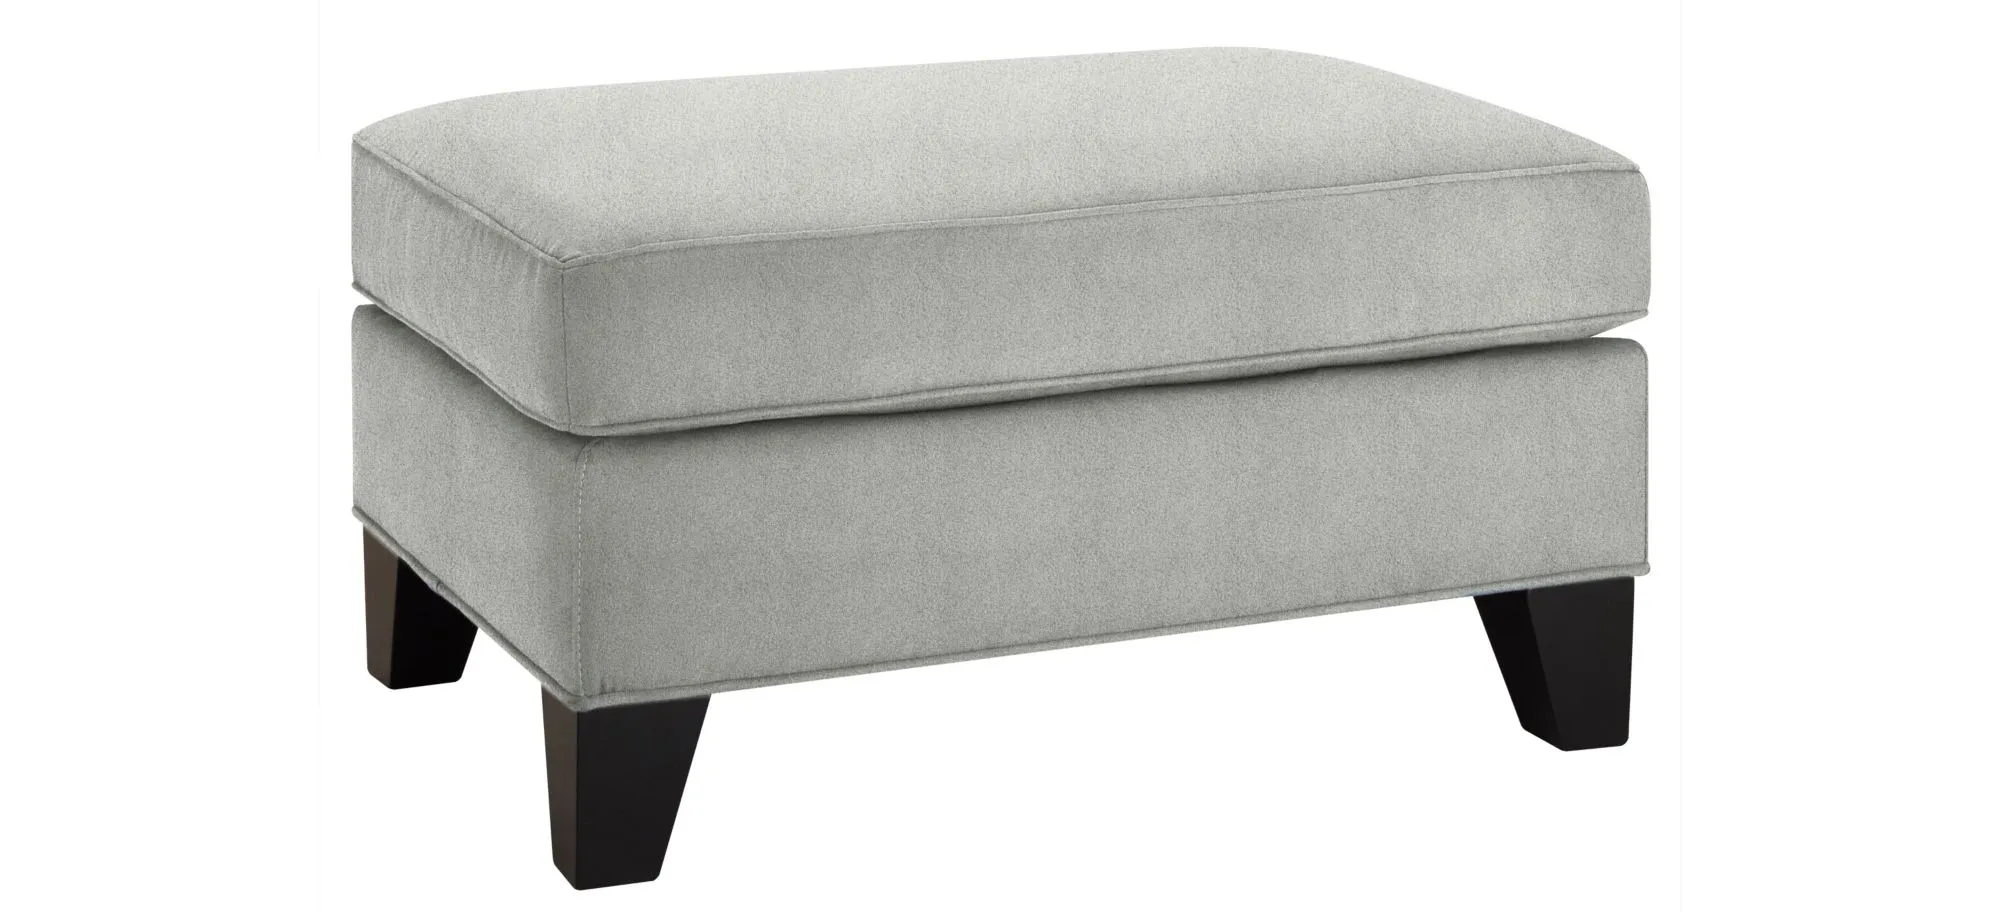 Carmine Ottoman in Suede so Soft Platinum by H.M. Richards